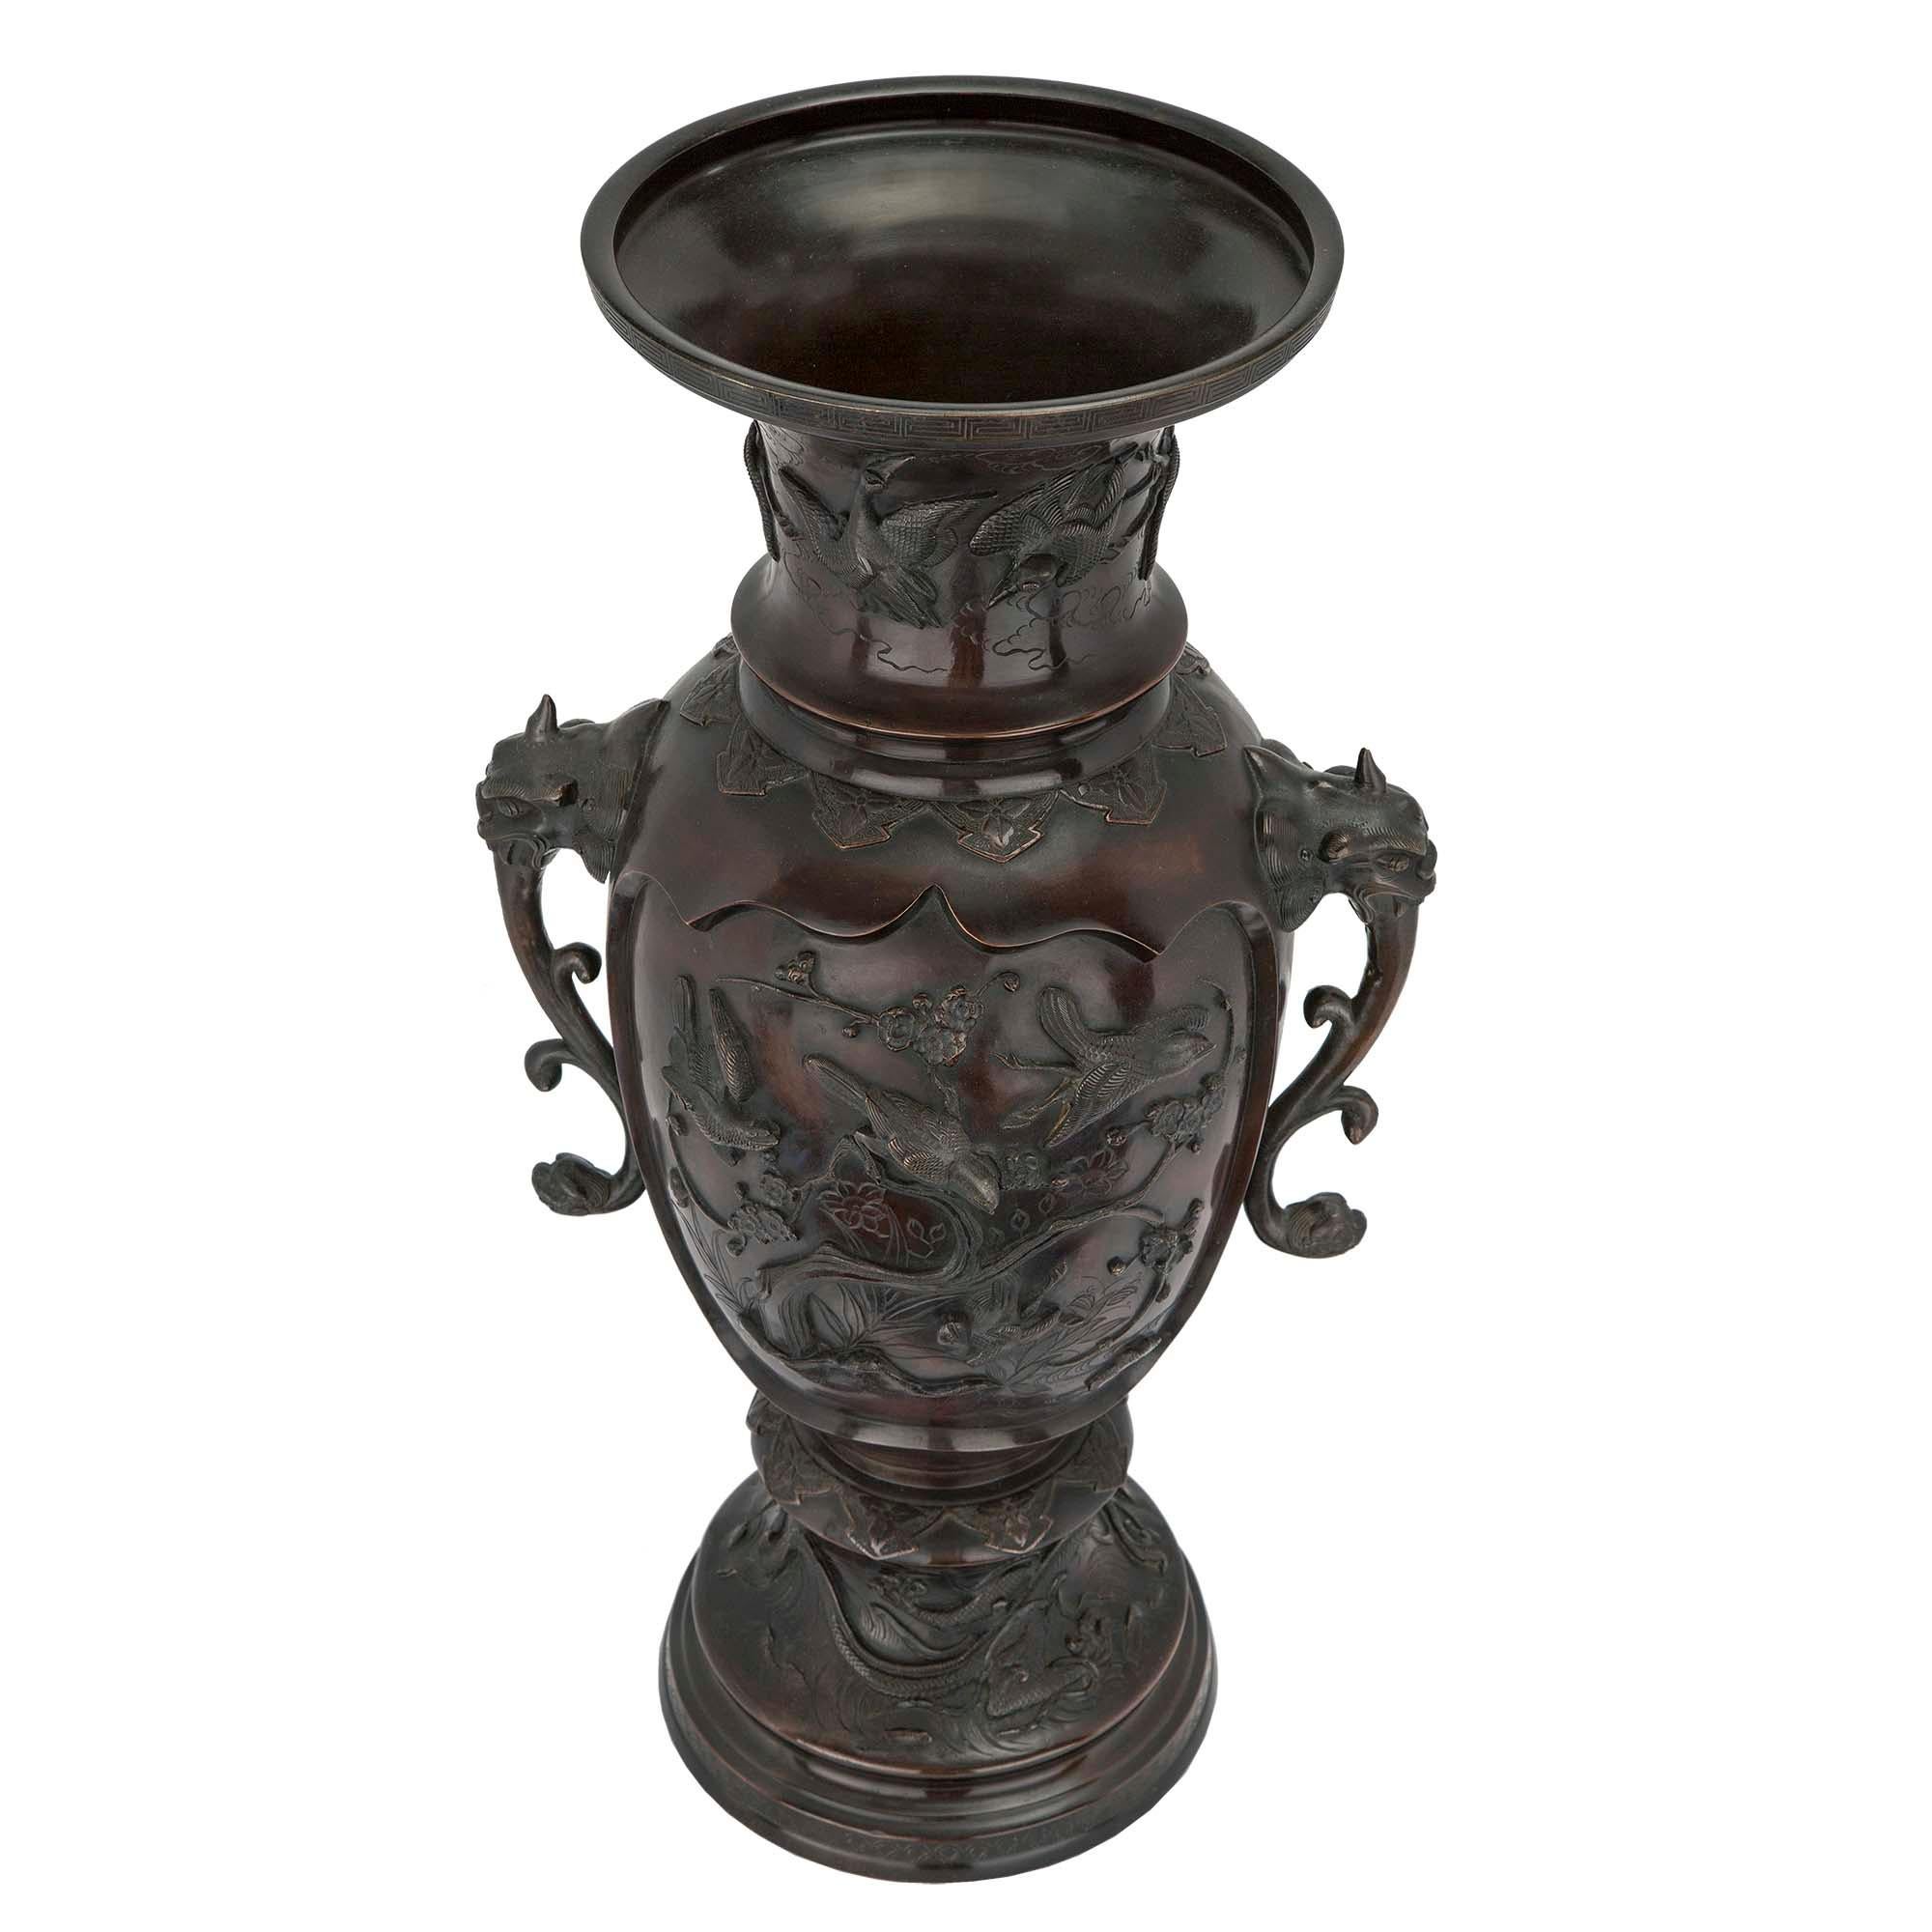 A very handsome and large scale 19th century Japanese Meiji Period patinated bronze urns. Each urn is raised on a circular mottled base. The urns are decorated throughout with scenes of birds and foliate. At each side is a foo dog mask with scrolled